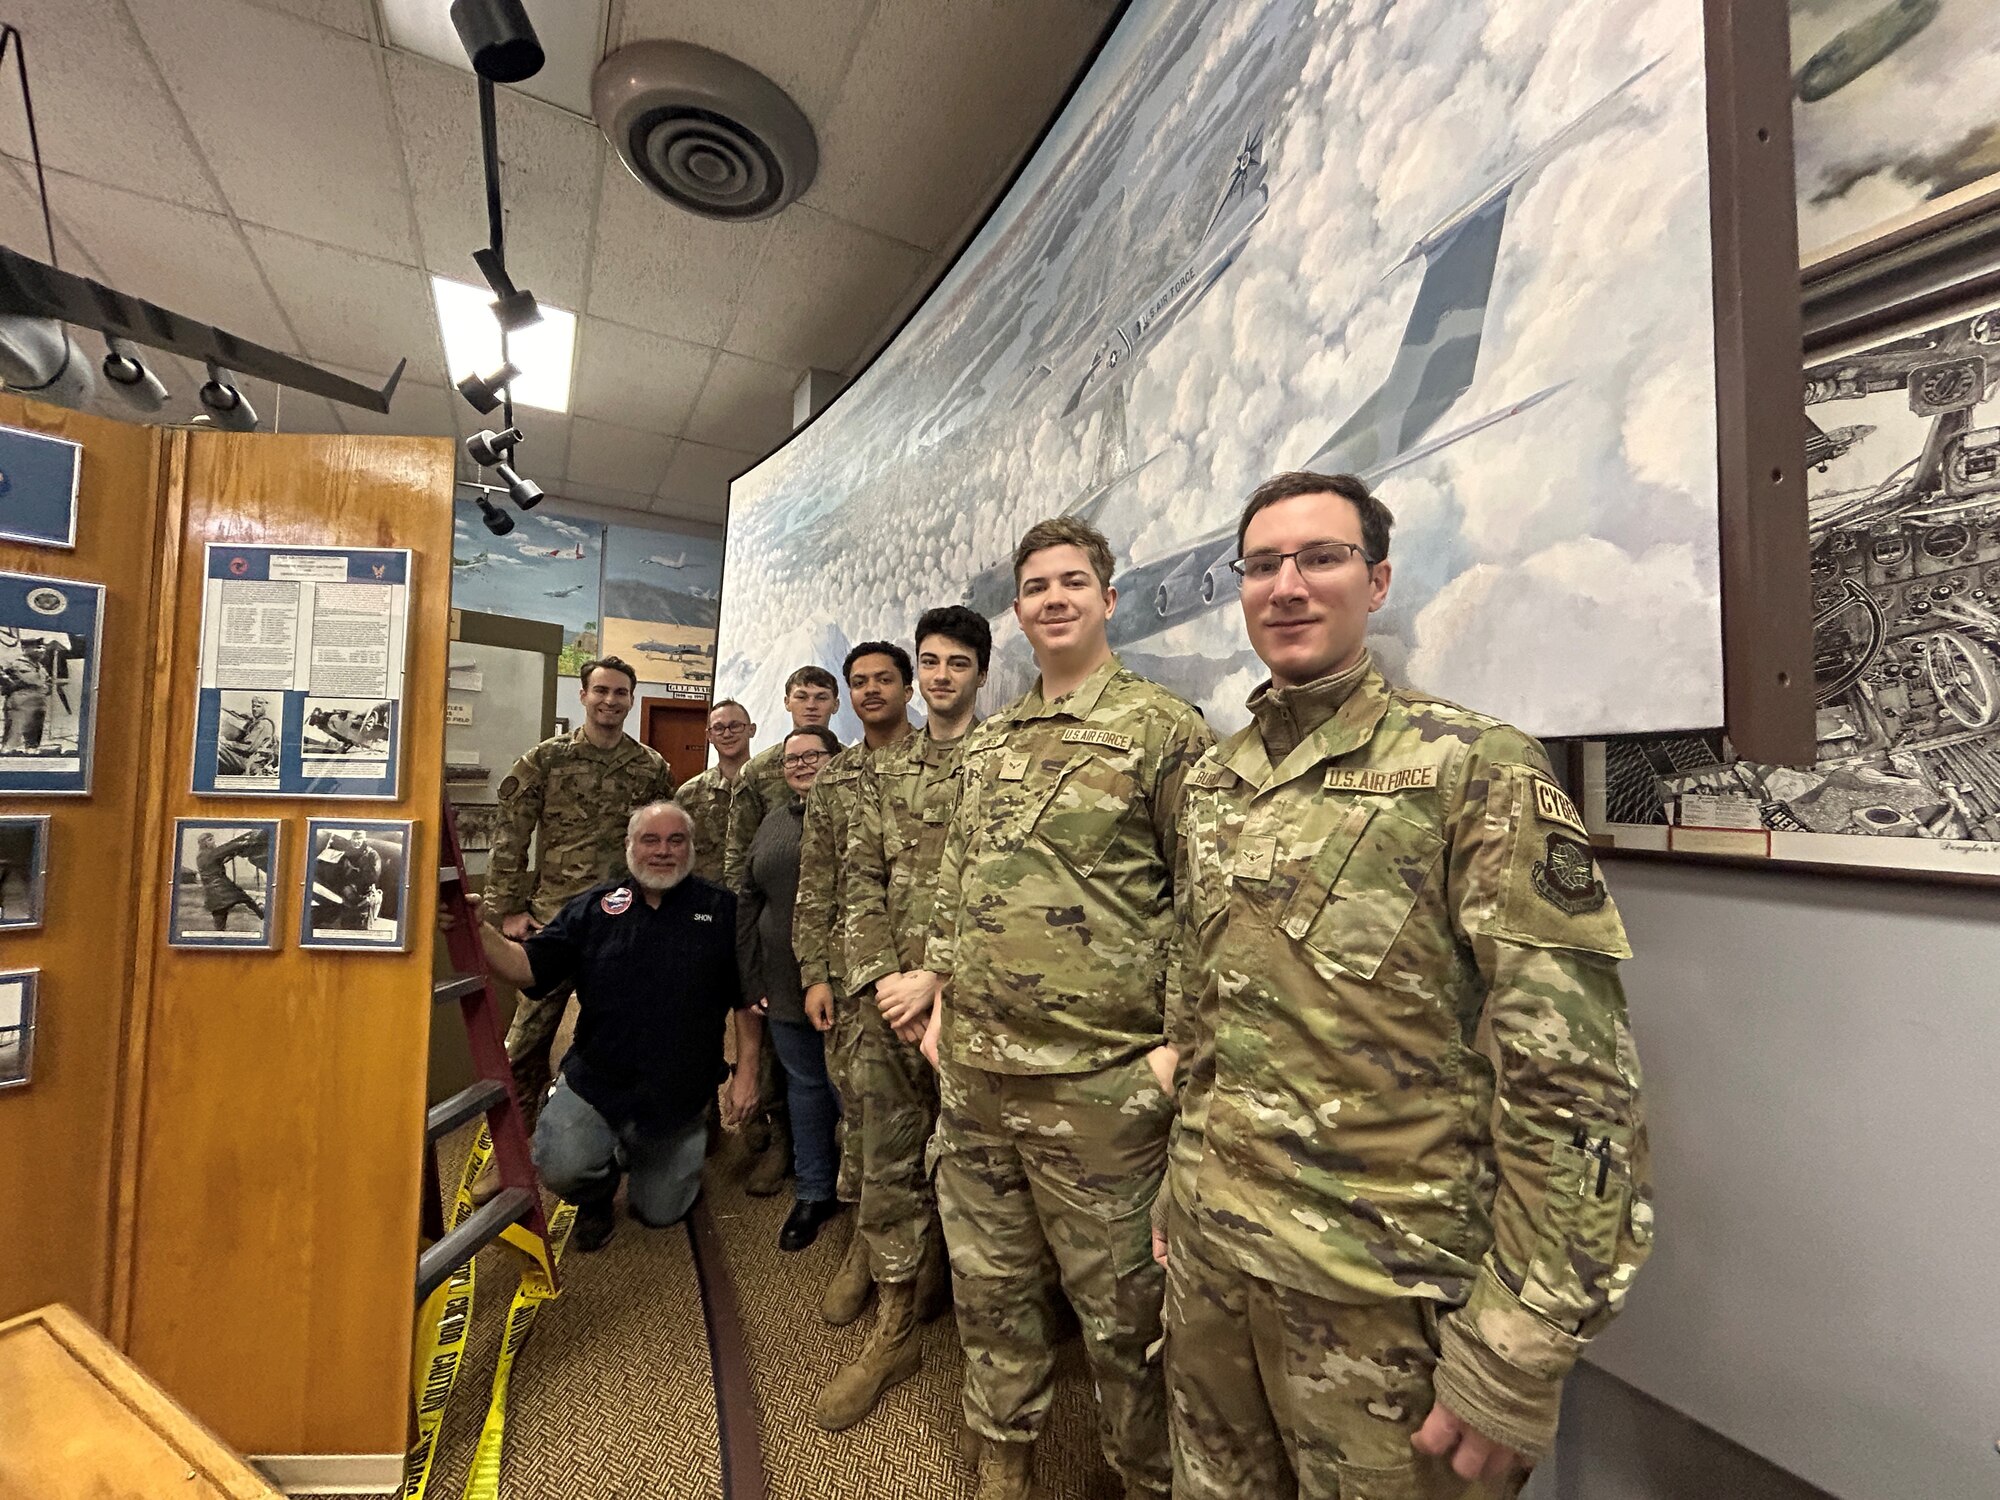 Team McChord Airmen, personnel with the 62d Airlift Wing Historian Office and McChord Air Museum volunteers stand in front of the newly restored “McChord Country Painting at Joint Base Lewis-McChord, Washington, Feb. 2, 2024. The 12-foot-long, 6-foot-high painting details various notable aircraft flying over McChord Air Force Base with Mount Rainier in the background. (U.S. Air Force Photo by Airman 1st Class Kylee Tyus)